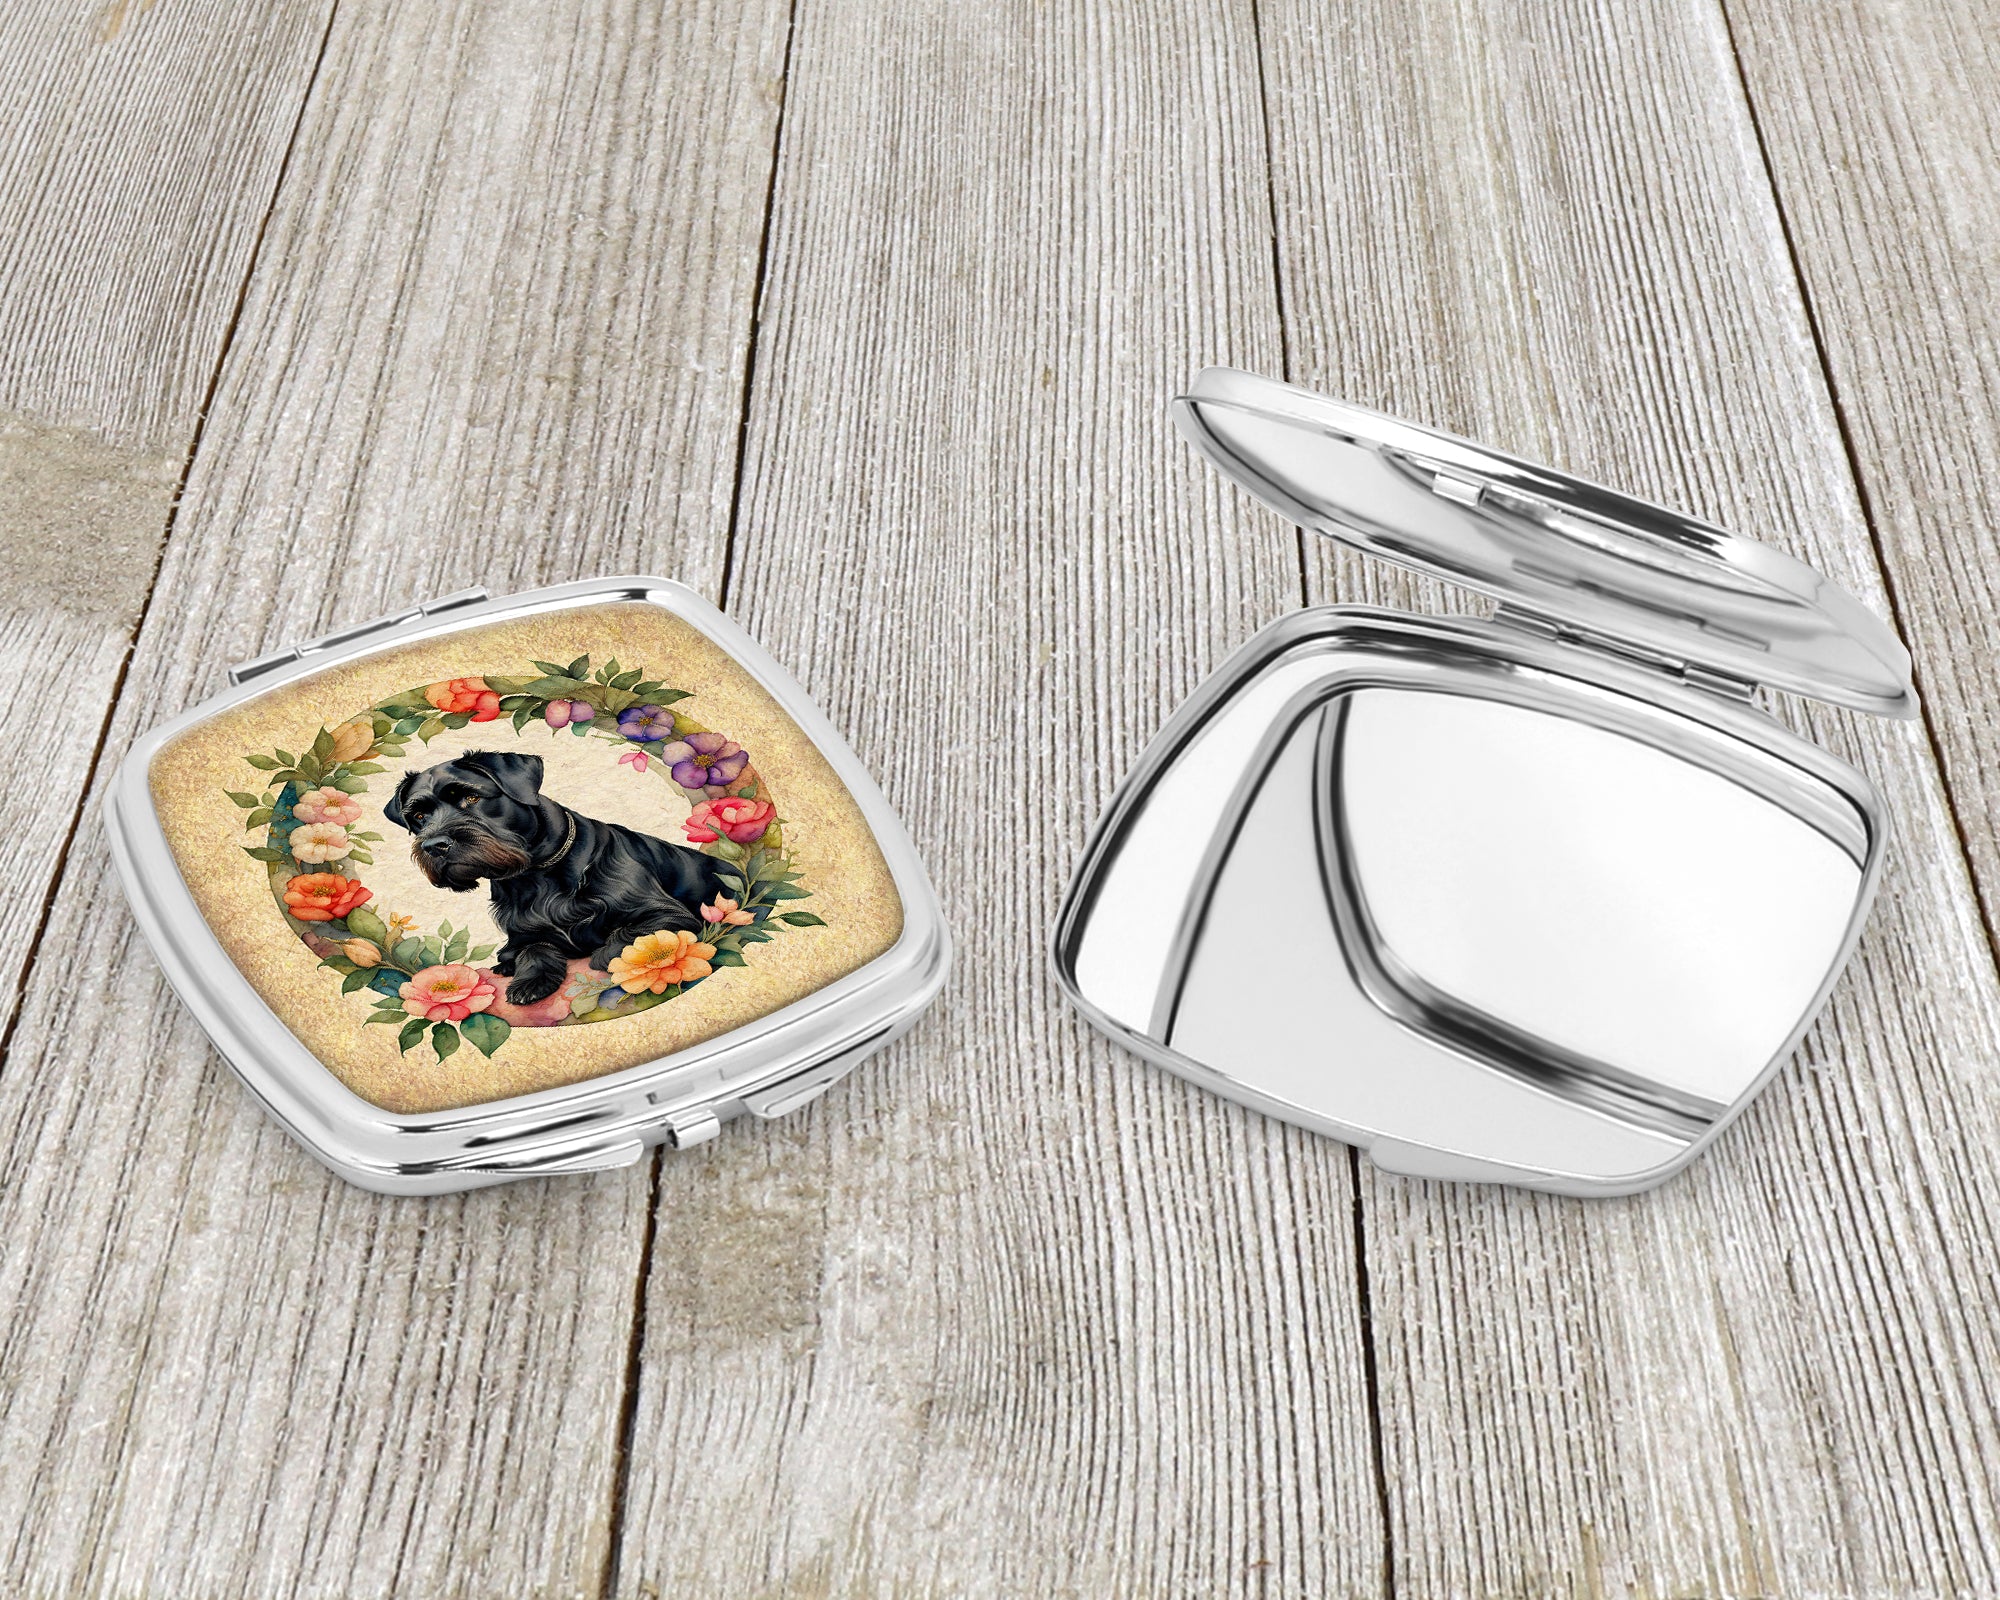 Giant Schnauzer and Flowers Compact Mirror